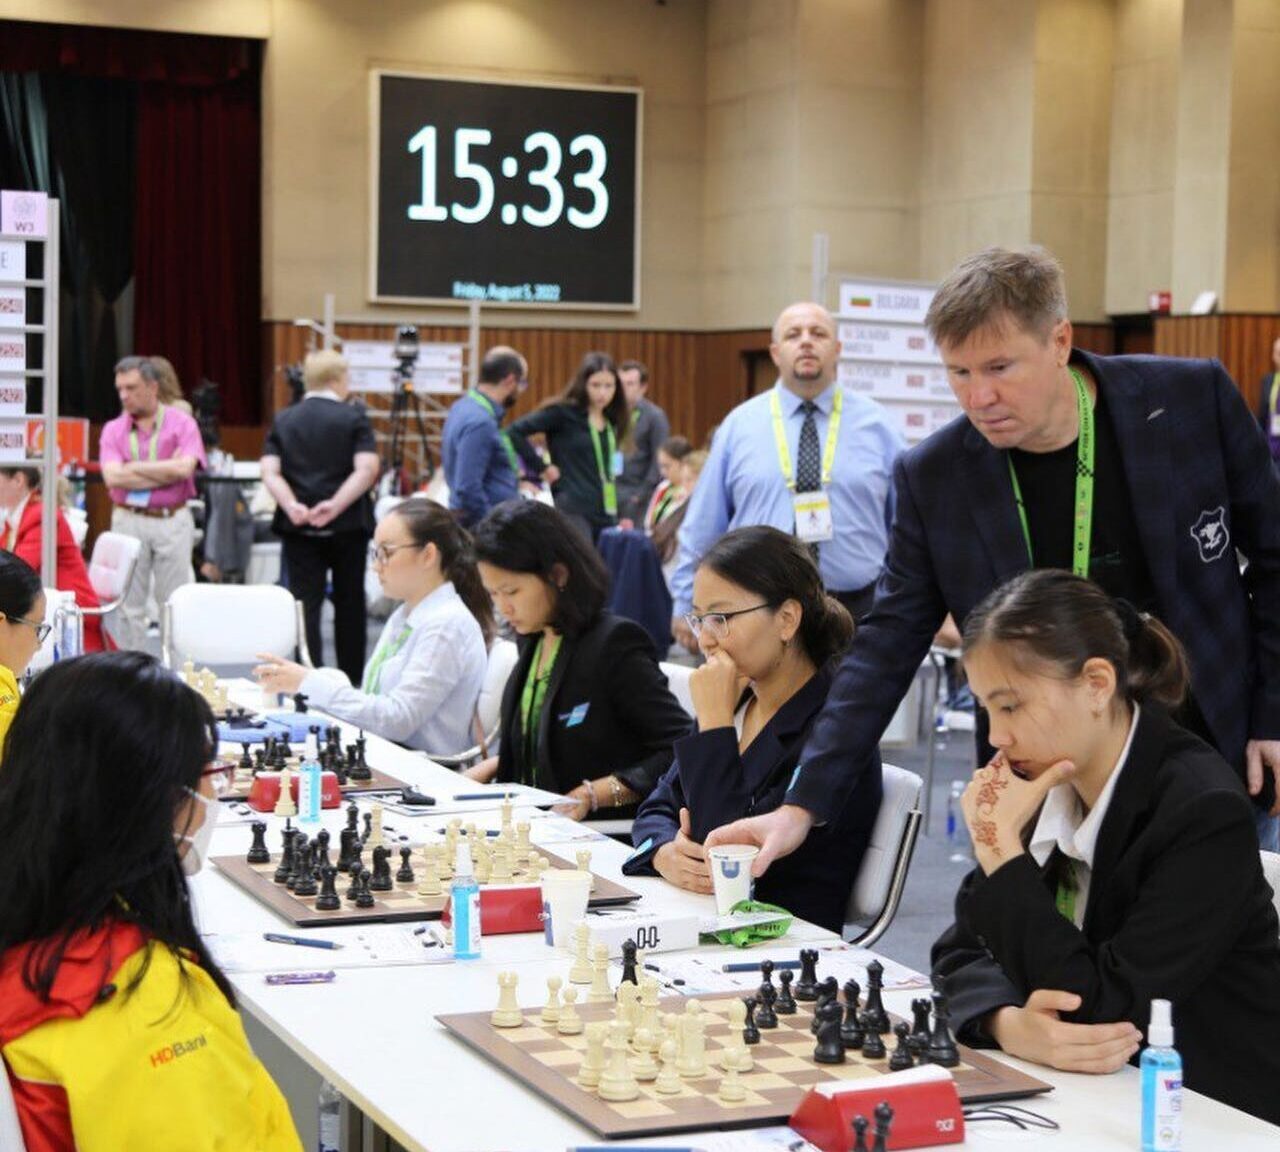 Uzbekistan will host the Chess Olympiad 2026. ~ CURRENT AFFAIRS